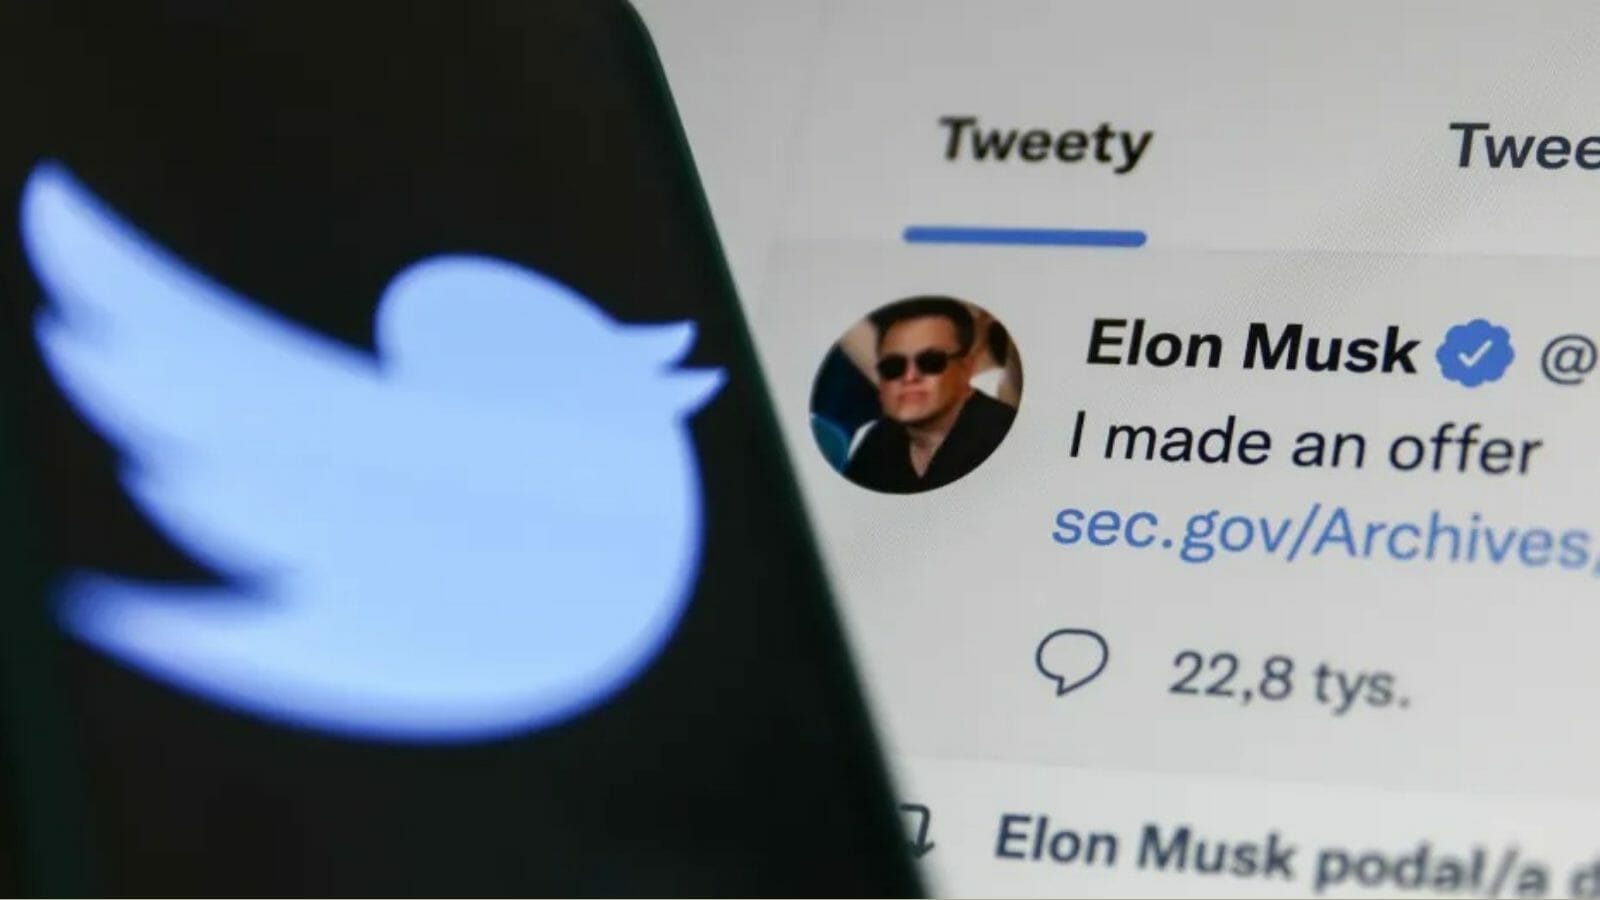 Twitter's board of directors has endorsed Elon Musk's takeover